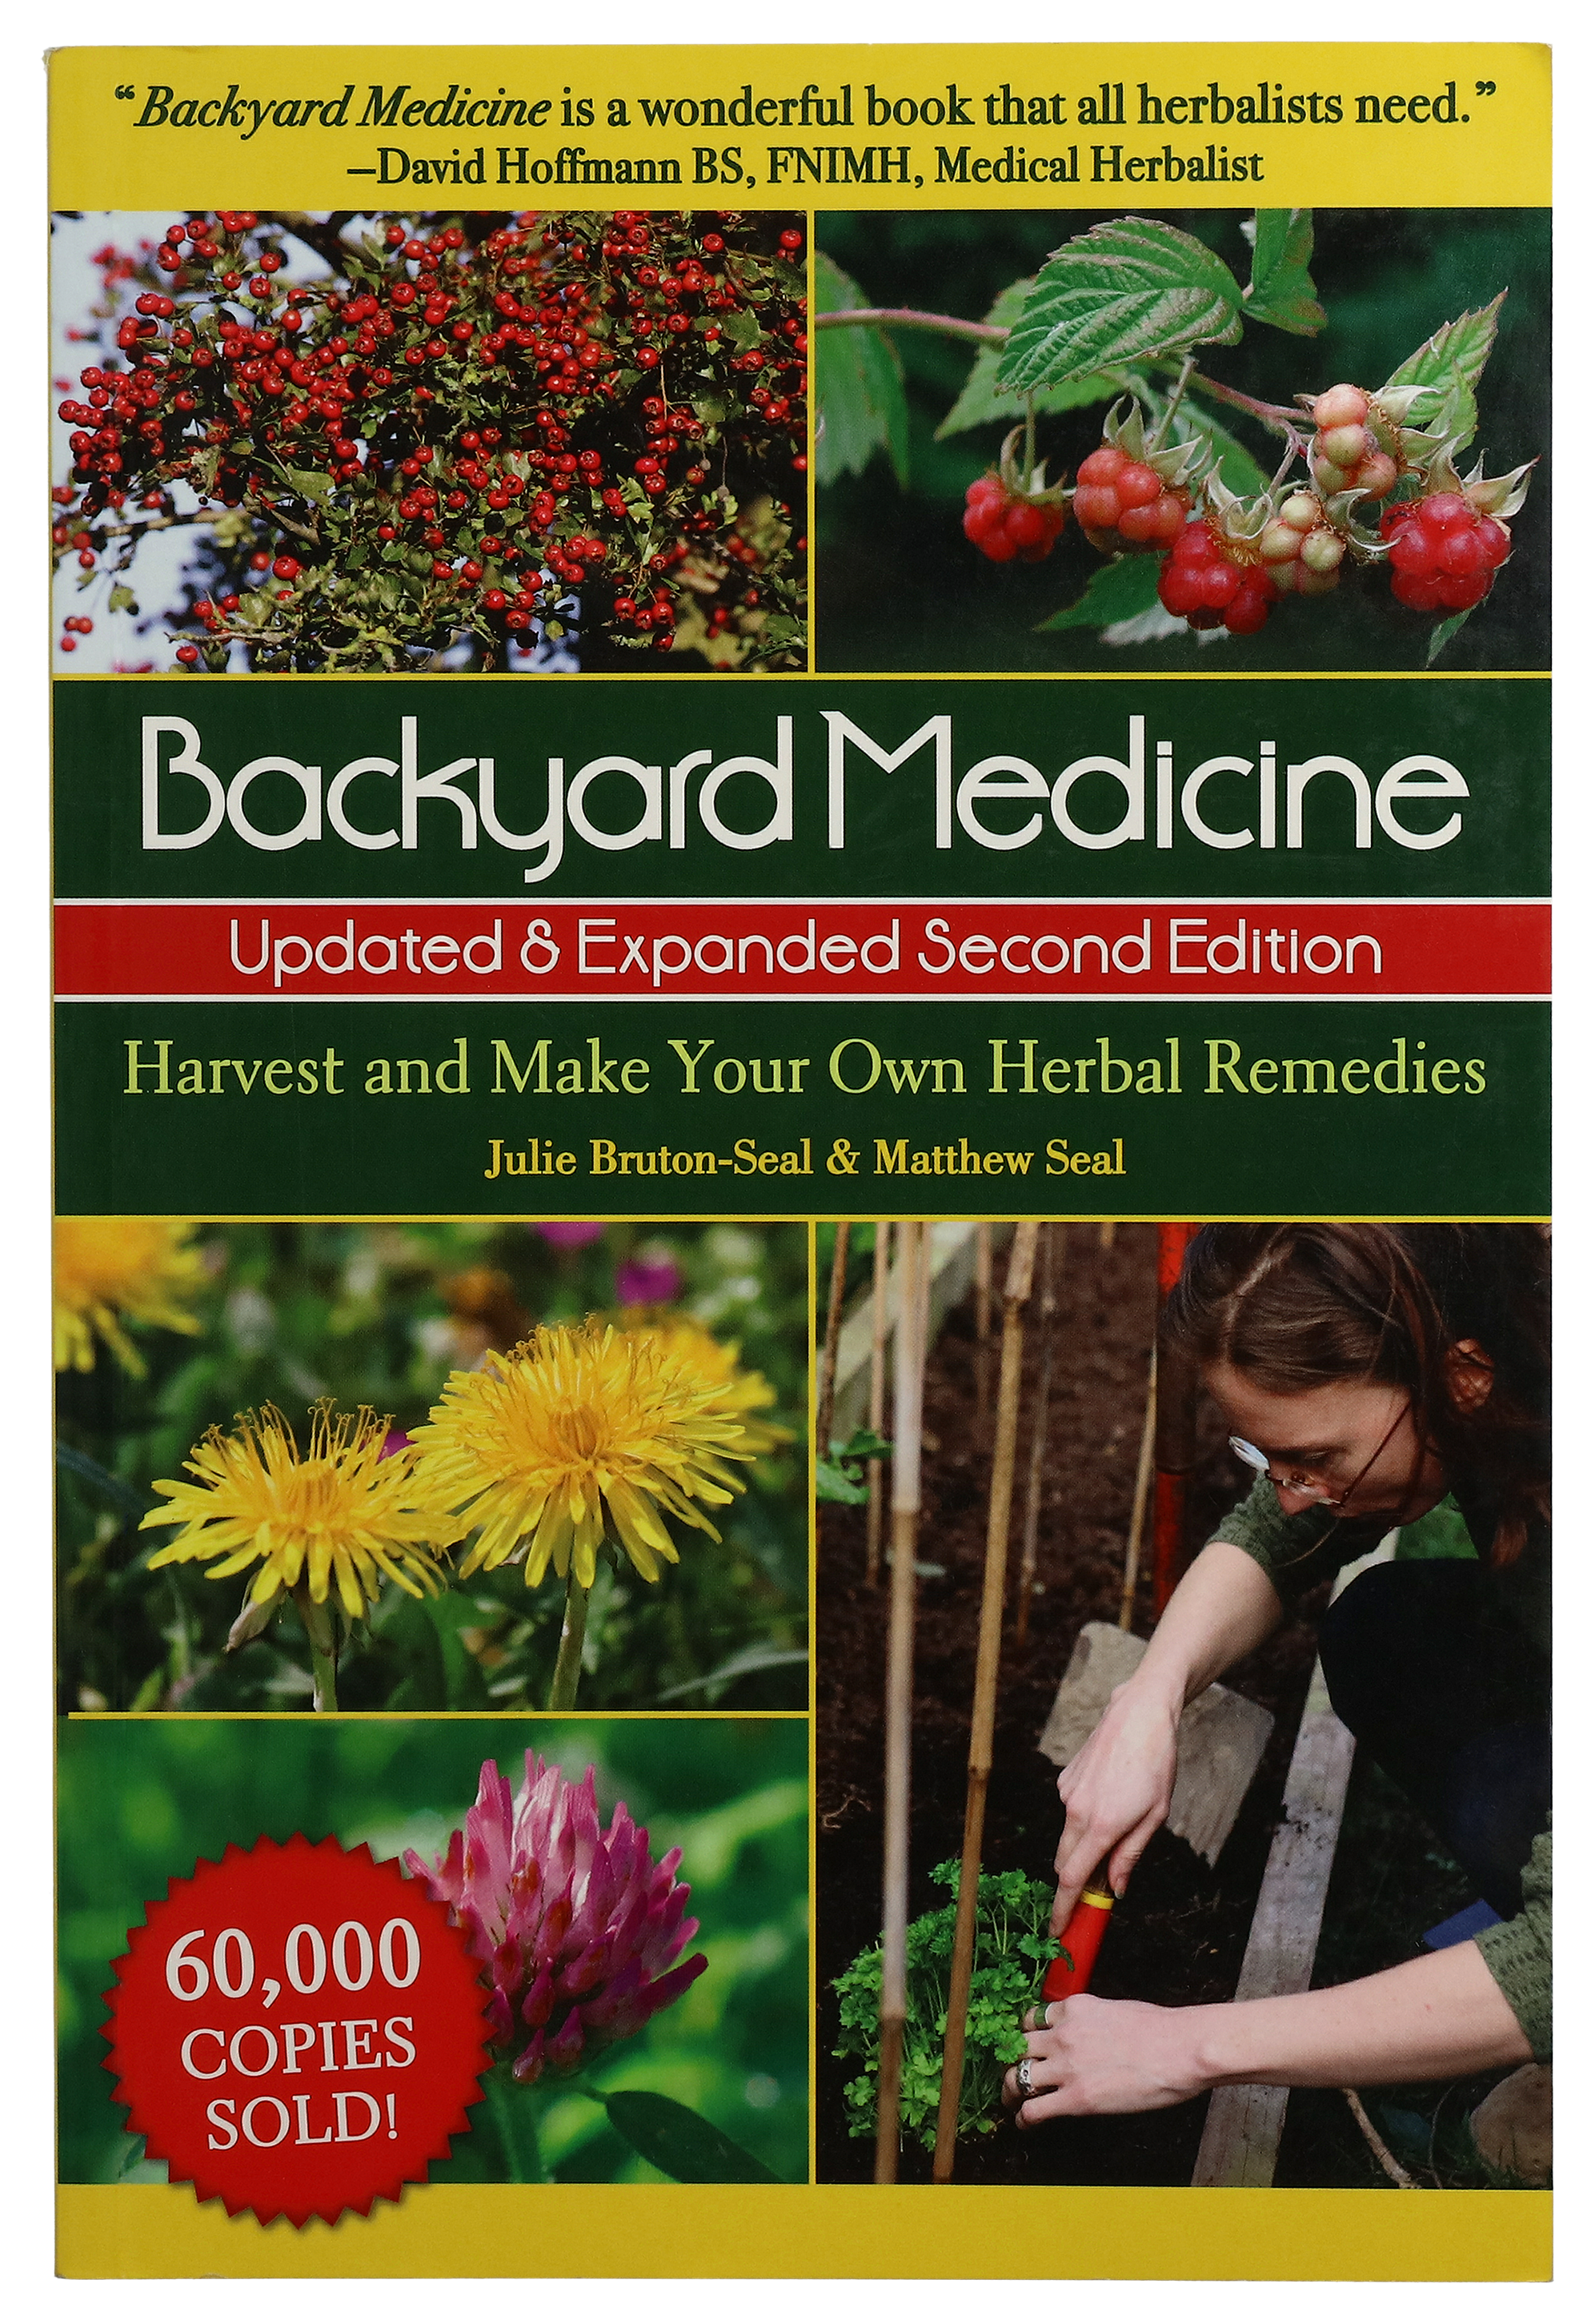 Backyard Medicine Harvest and Make Your Own Herbal Remedies Second Edition Book by Julie Bruton-Seal and Matthew Seal